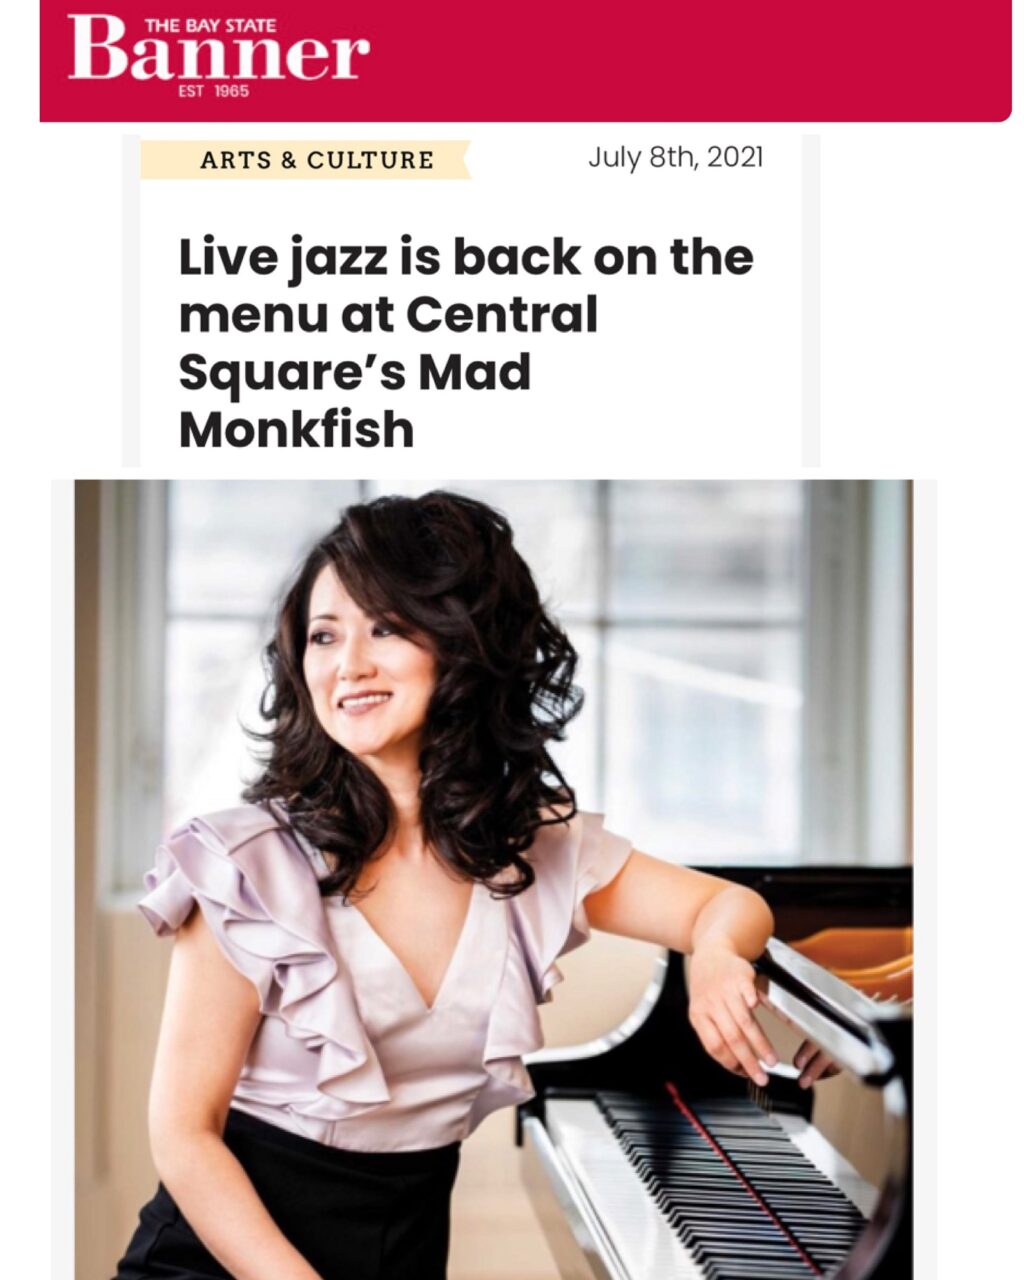 Live jazz is back on the menu at The Mad Monkfish - with Yoko Miwa - Bay State Banner